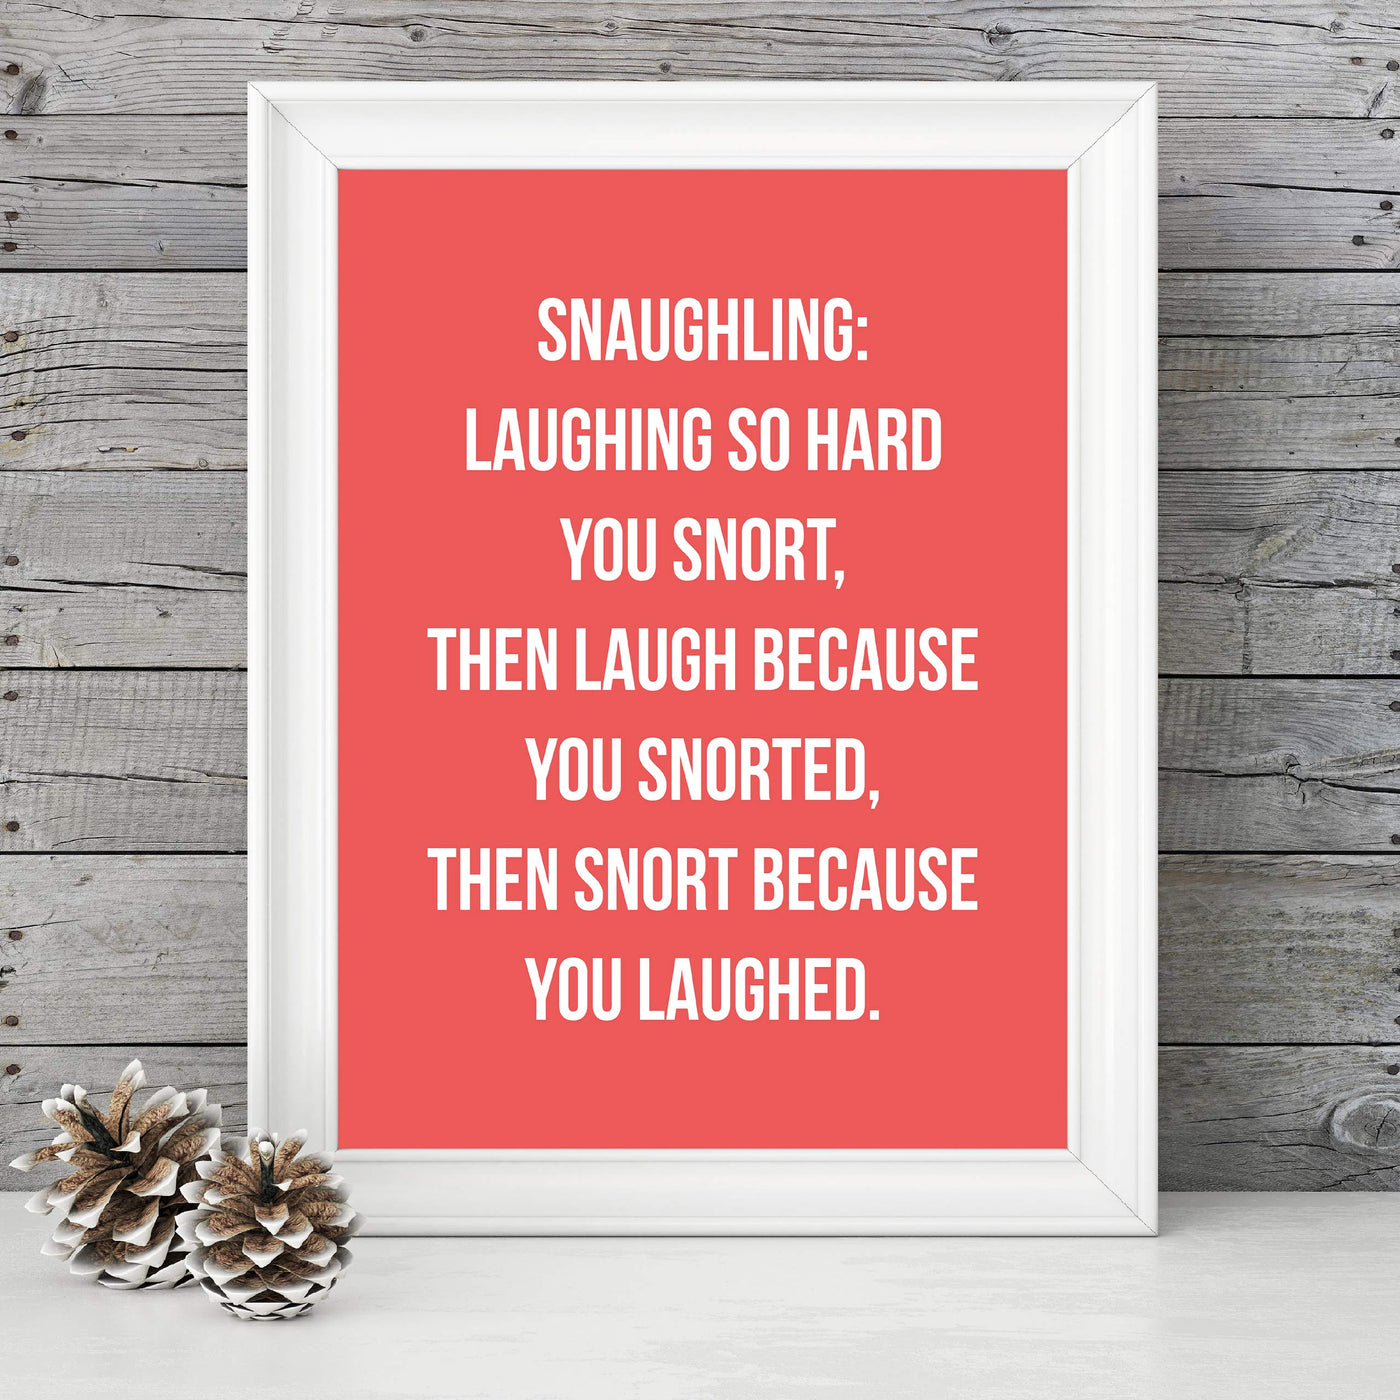 Snaughling: Laughing So Hard You Snort Funny Wall Art Sign -8 x 10" Typographic Poster Print-Ready to Frame. Humorous Home-Bar-Shop-Cave-Novelty Decor. Perfect Desk & Cubicle Sign! Great Gift!